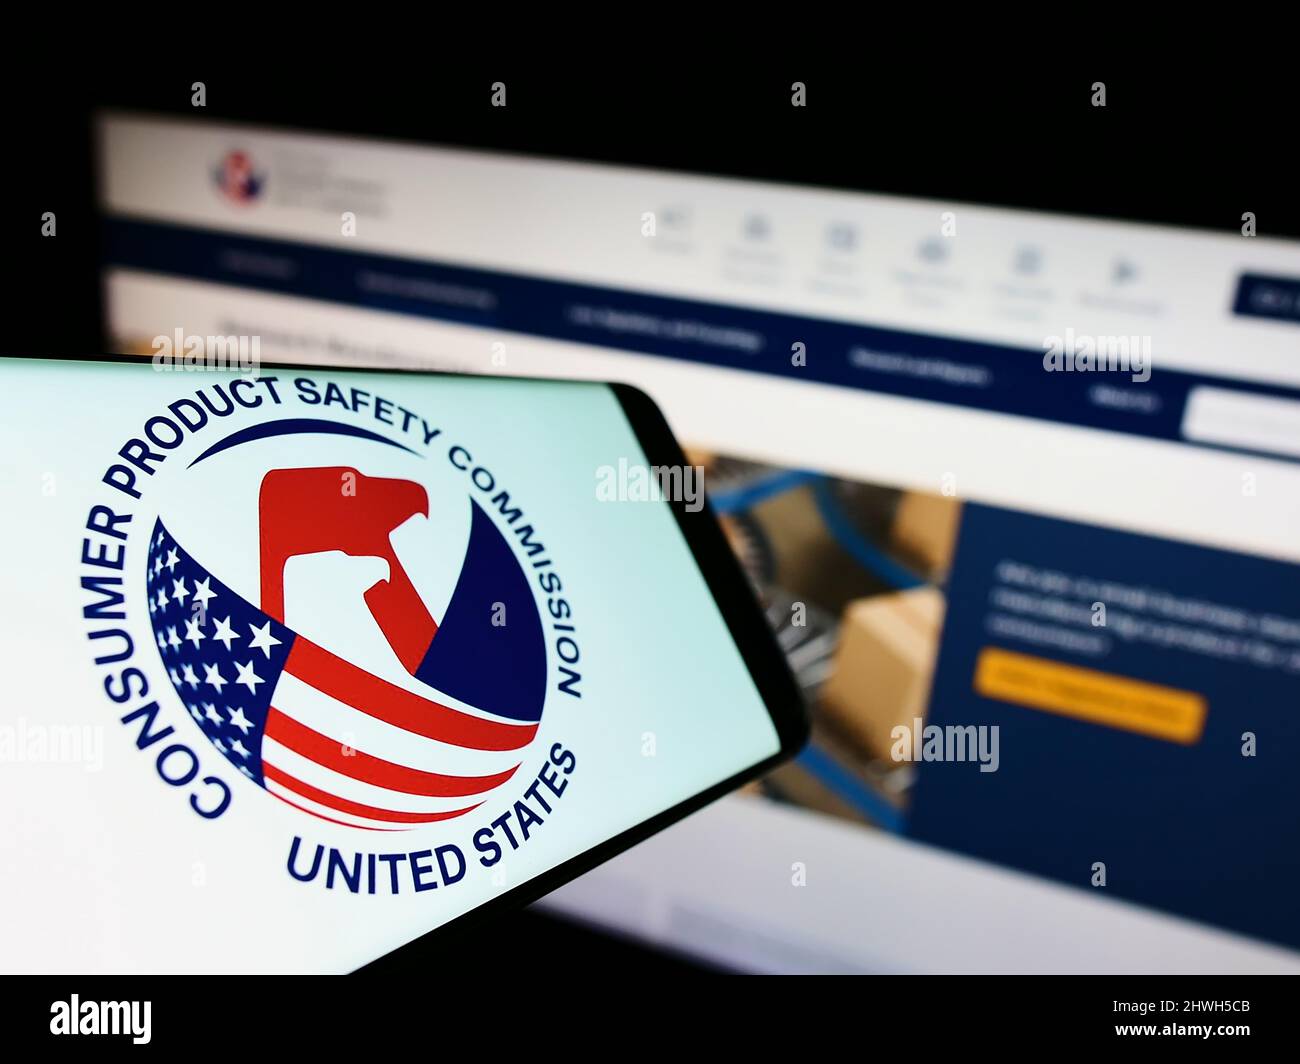 Smartphone with logo of United States Consumer Product Safety Commission (USCPSC) on screen in front of website. Focus on center of phone display. Stock Photo